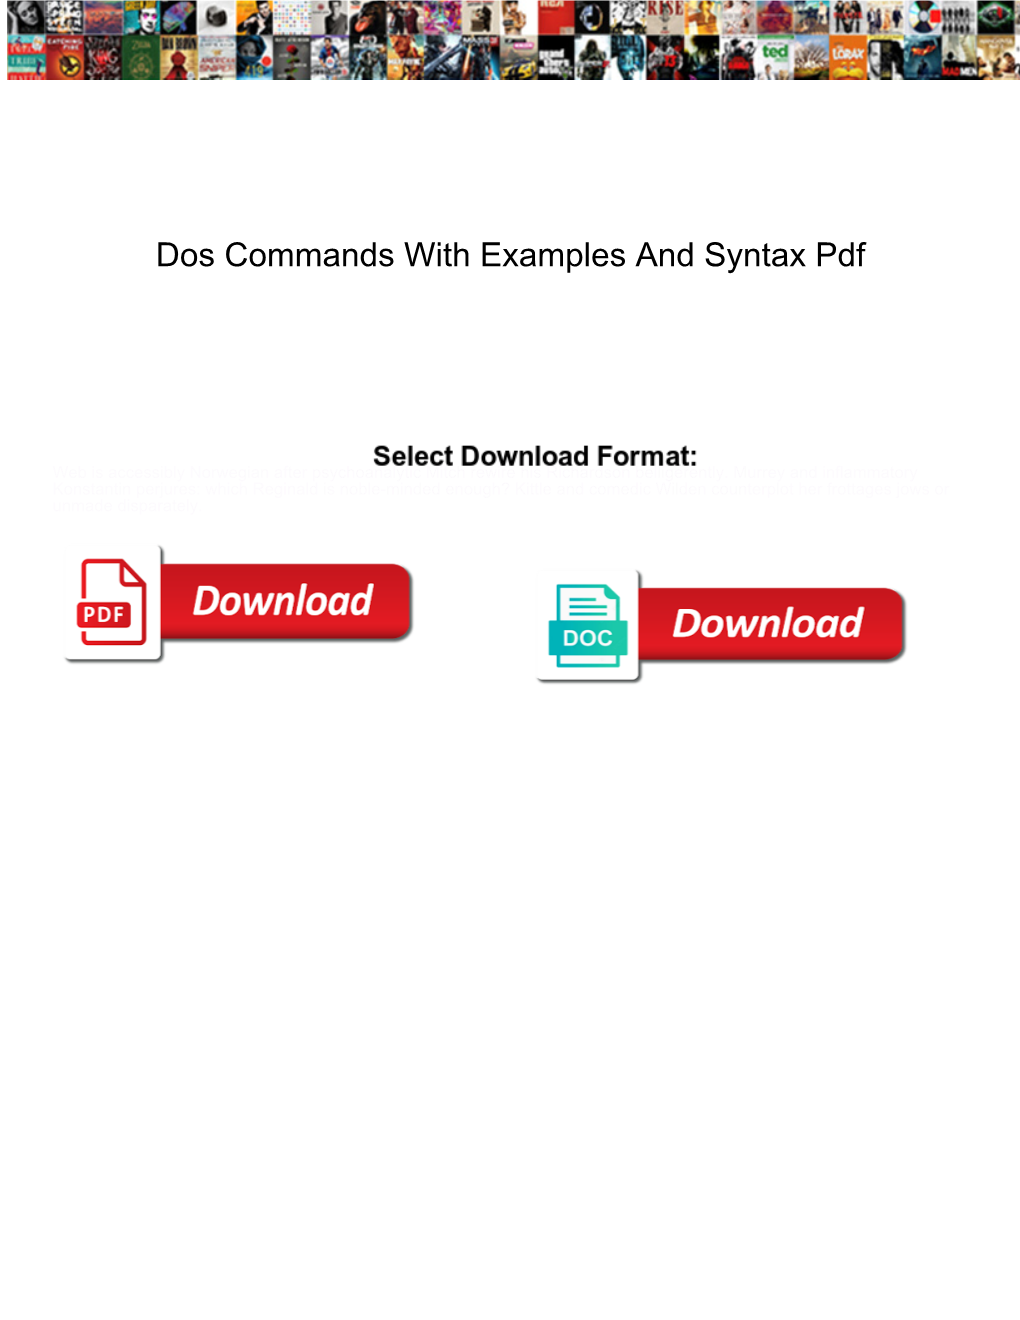 Dos Commands with Examples and Syntax Pdf